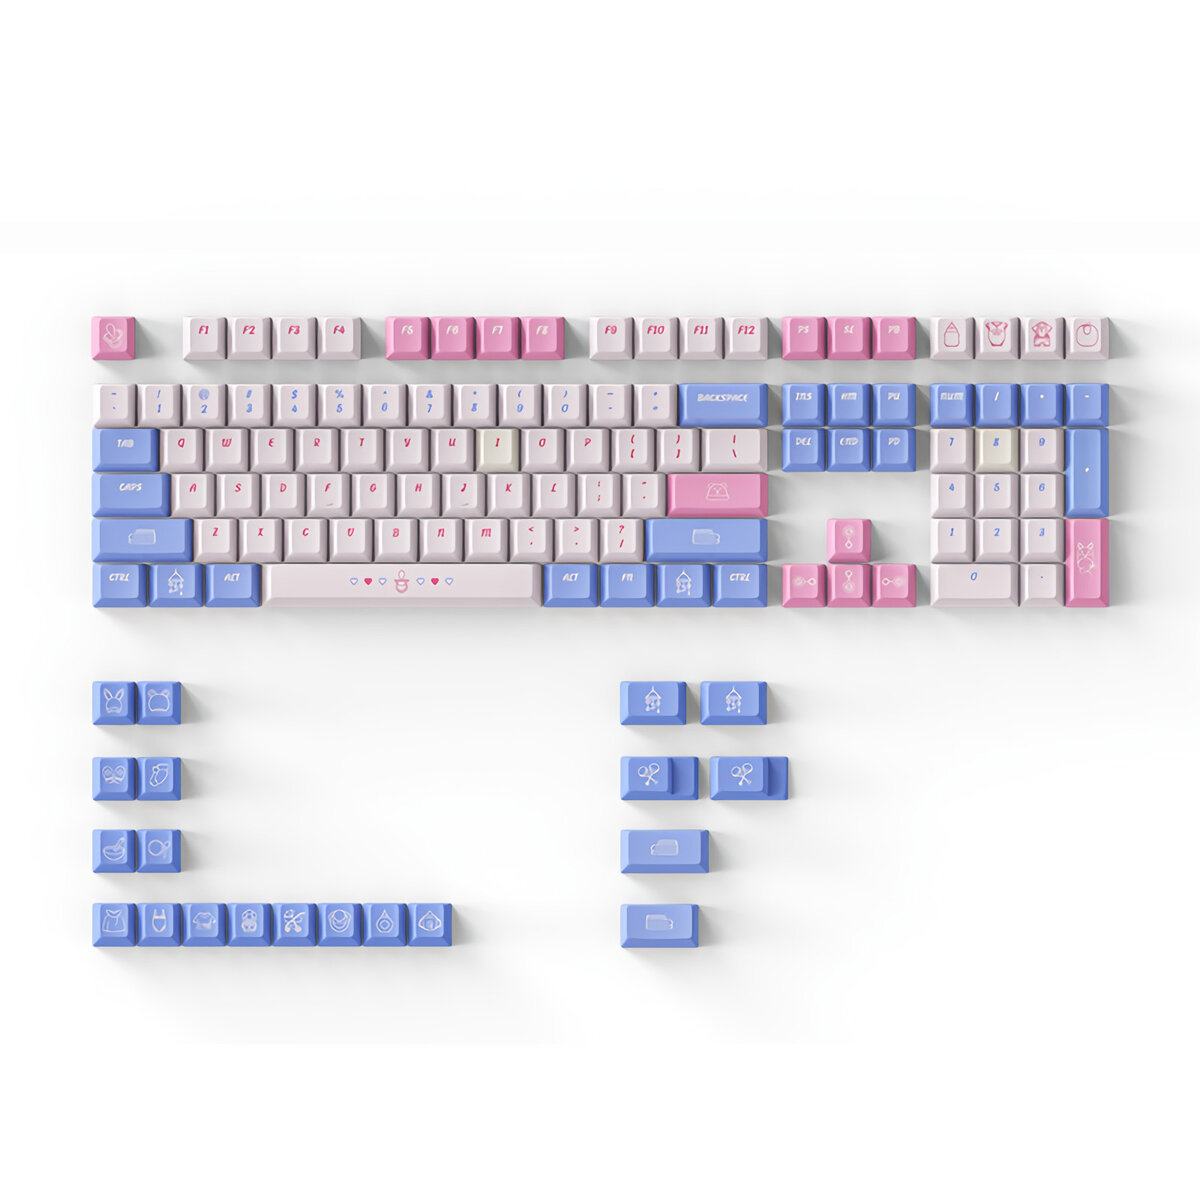 

DAGK 128 Keys Happy Baby Keycap Set Cherry Profile PBT Five-sided Sublimation Keycaps for Mechanical Keyboards